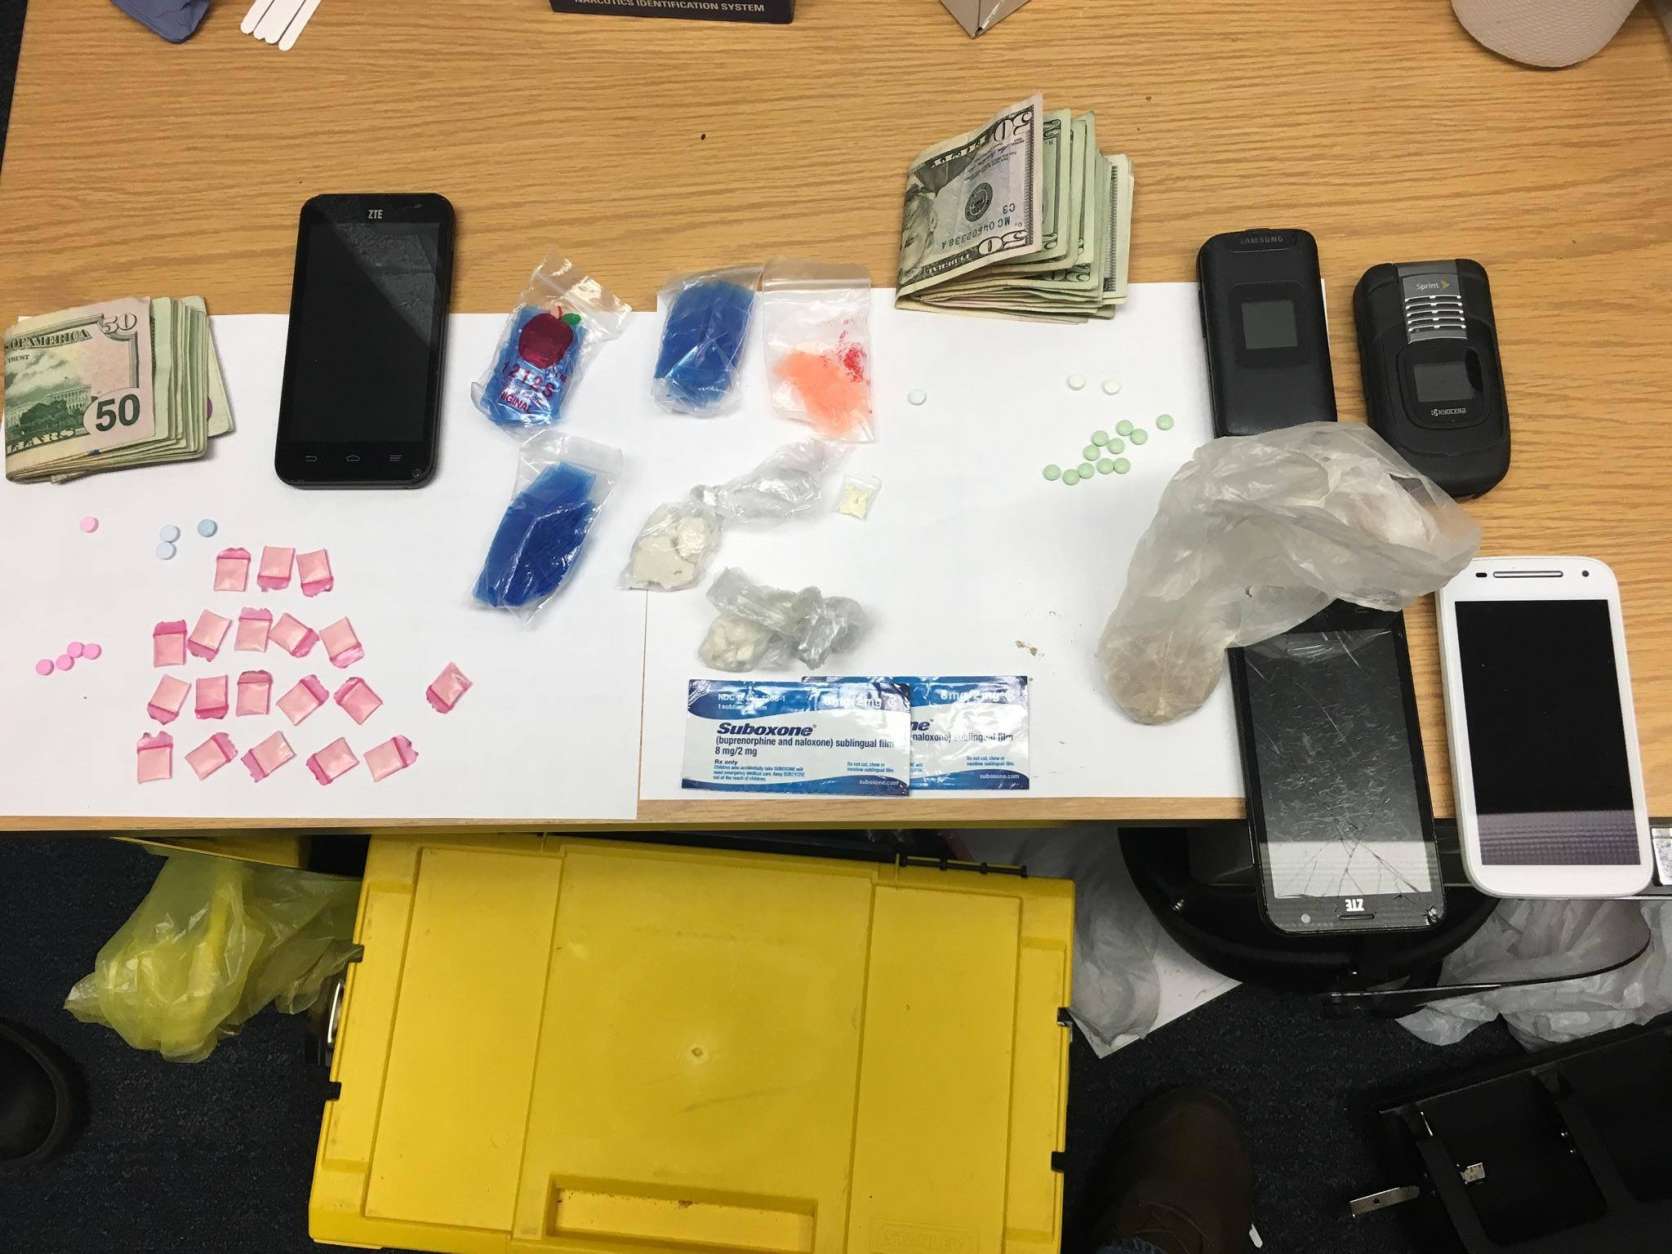 Anne Arundel Detectives from the Northern District Tactical Narcotics Team executed a warrant for a Pasadena home in March 2016 after a narcotics trafficking investigation. Detectives seized more than 11 grams of cocaine, more than 6 grams of raw heroin, 19 baggies of heroin, 19 oxycodone tablets, 3 alprazolam tablets, 2 Suboxone strips and more than $500 cash. Two suspects were charged with possession with the intent to distribute. (Courtesy Anne Arundel County Police)